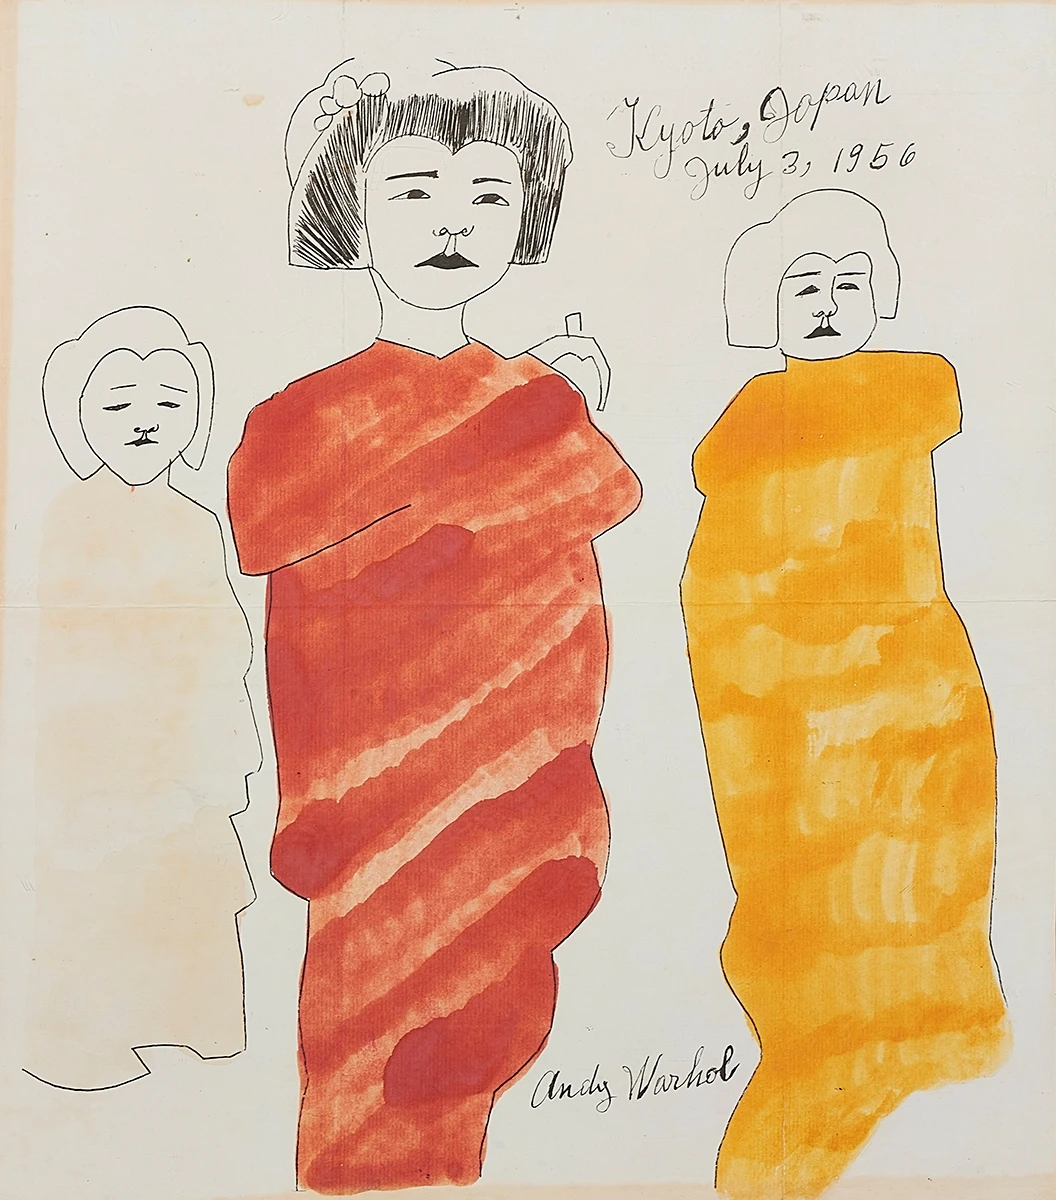 Warhol sketch, bought at rummage sale for $5, on sale for $1.9M